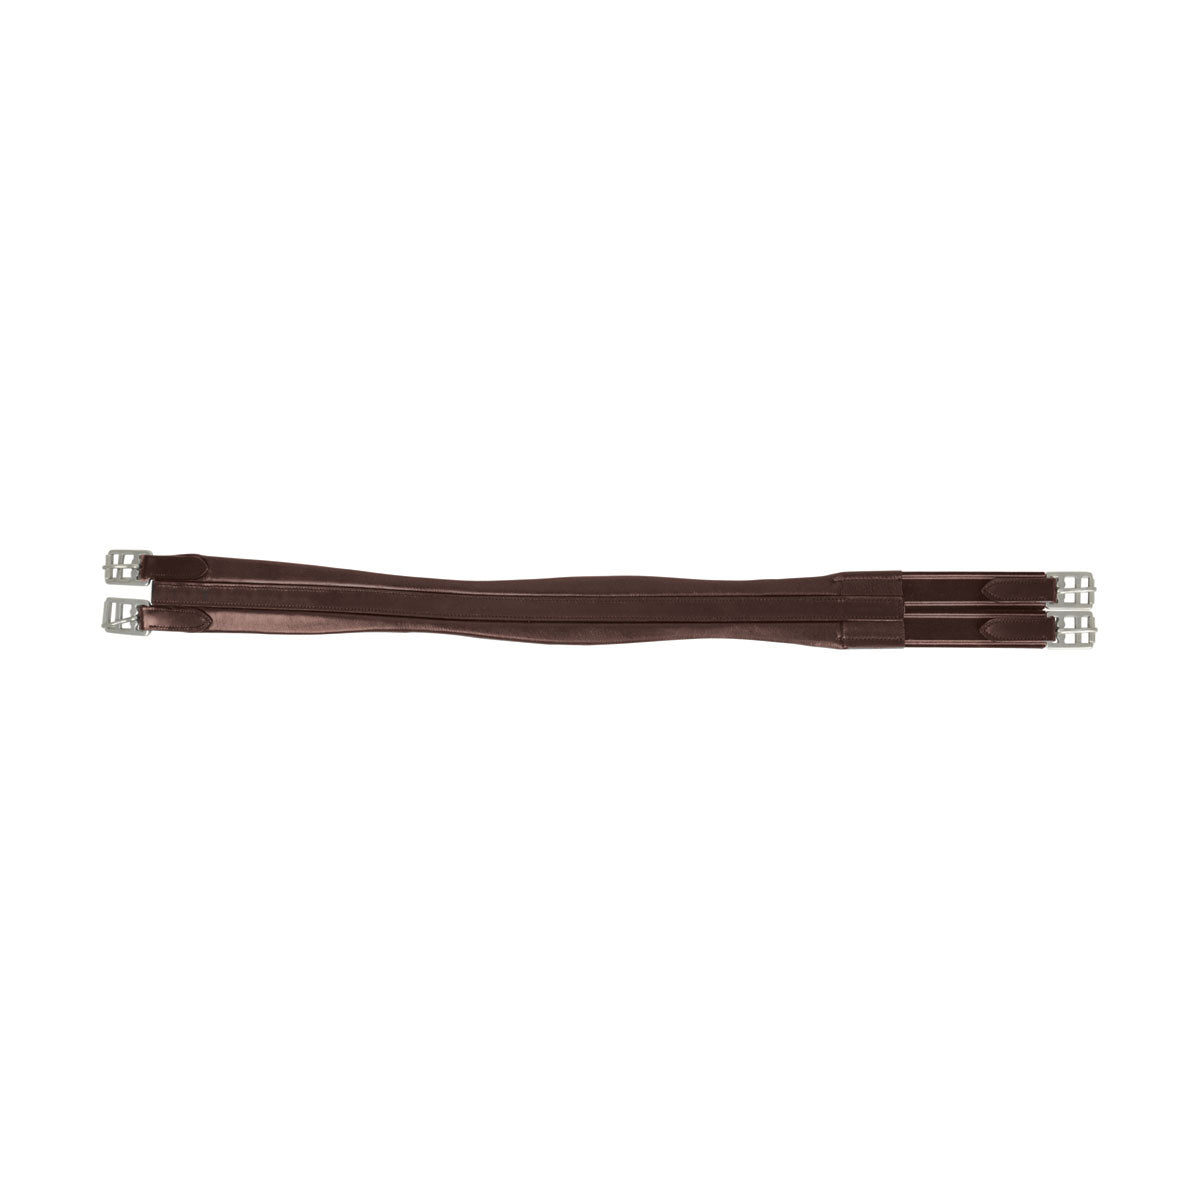 Hy Equestrian Leather Padded Atherstone Girth Elasticated Both Ends Brown 36" Barnstaple Equestrian Supplies